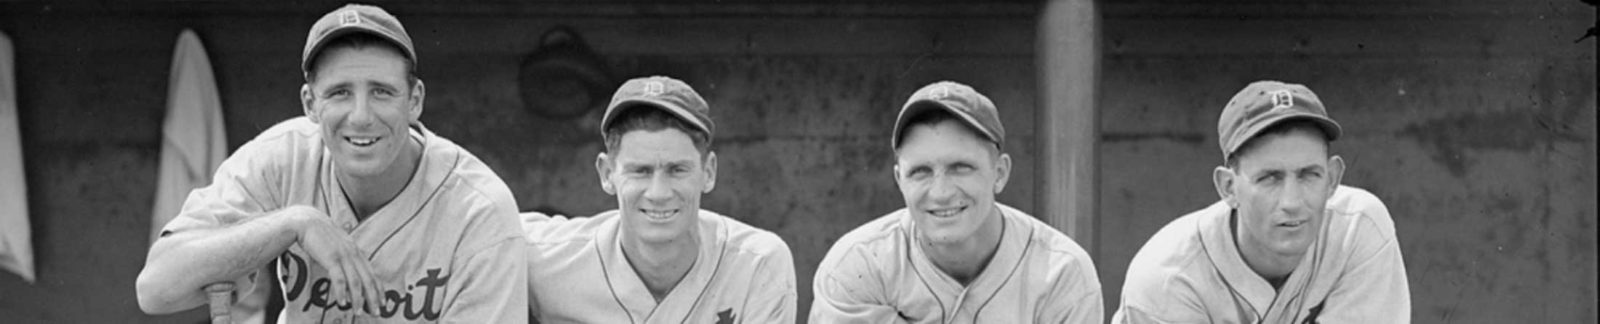 The Life and Times of Hank Greenberg - header